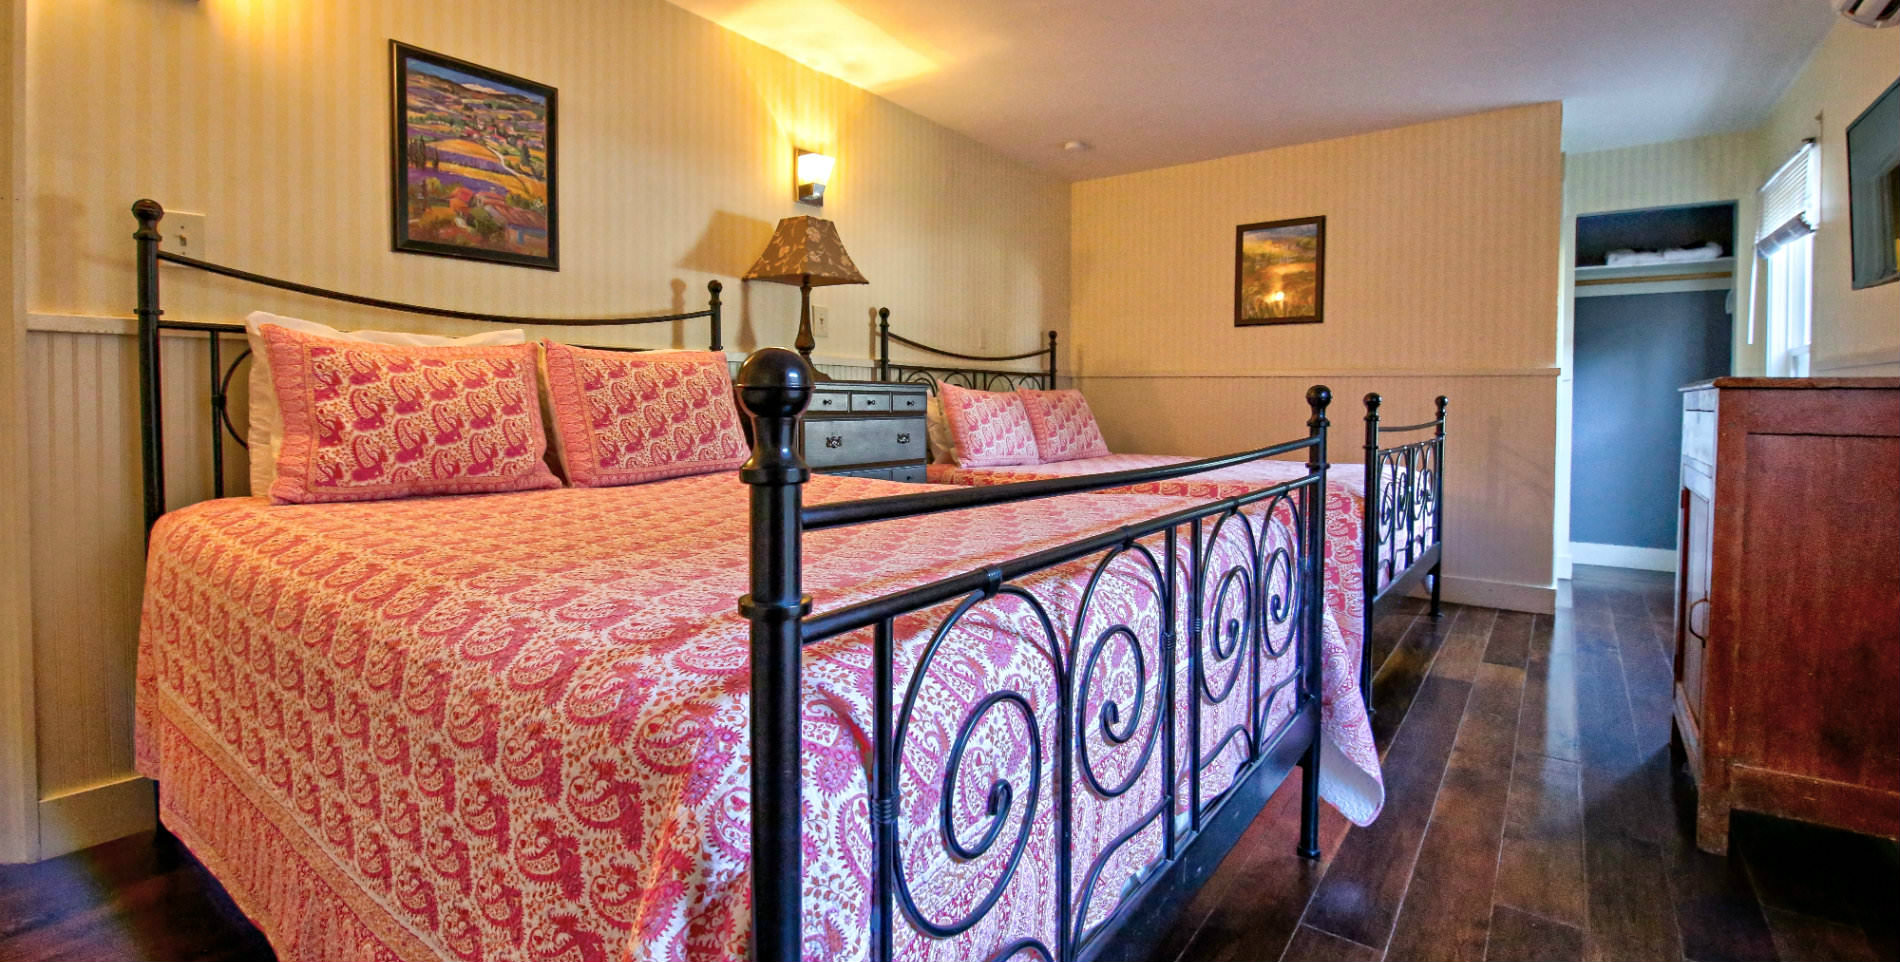 Guest room with cream striped wallpaper, two beds with bright pink bedding, hardwood floors